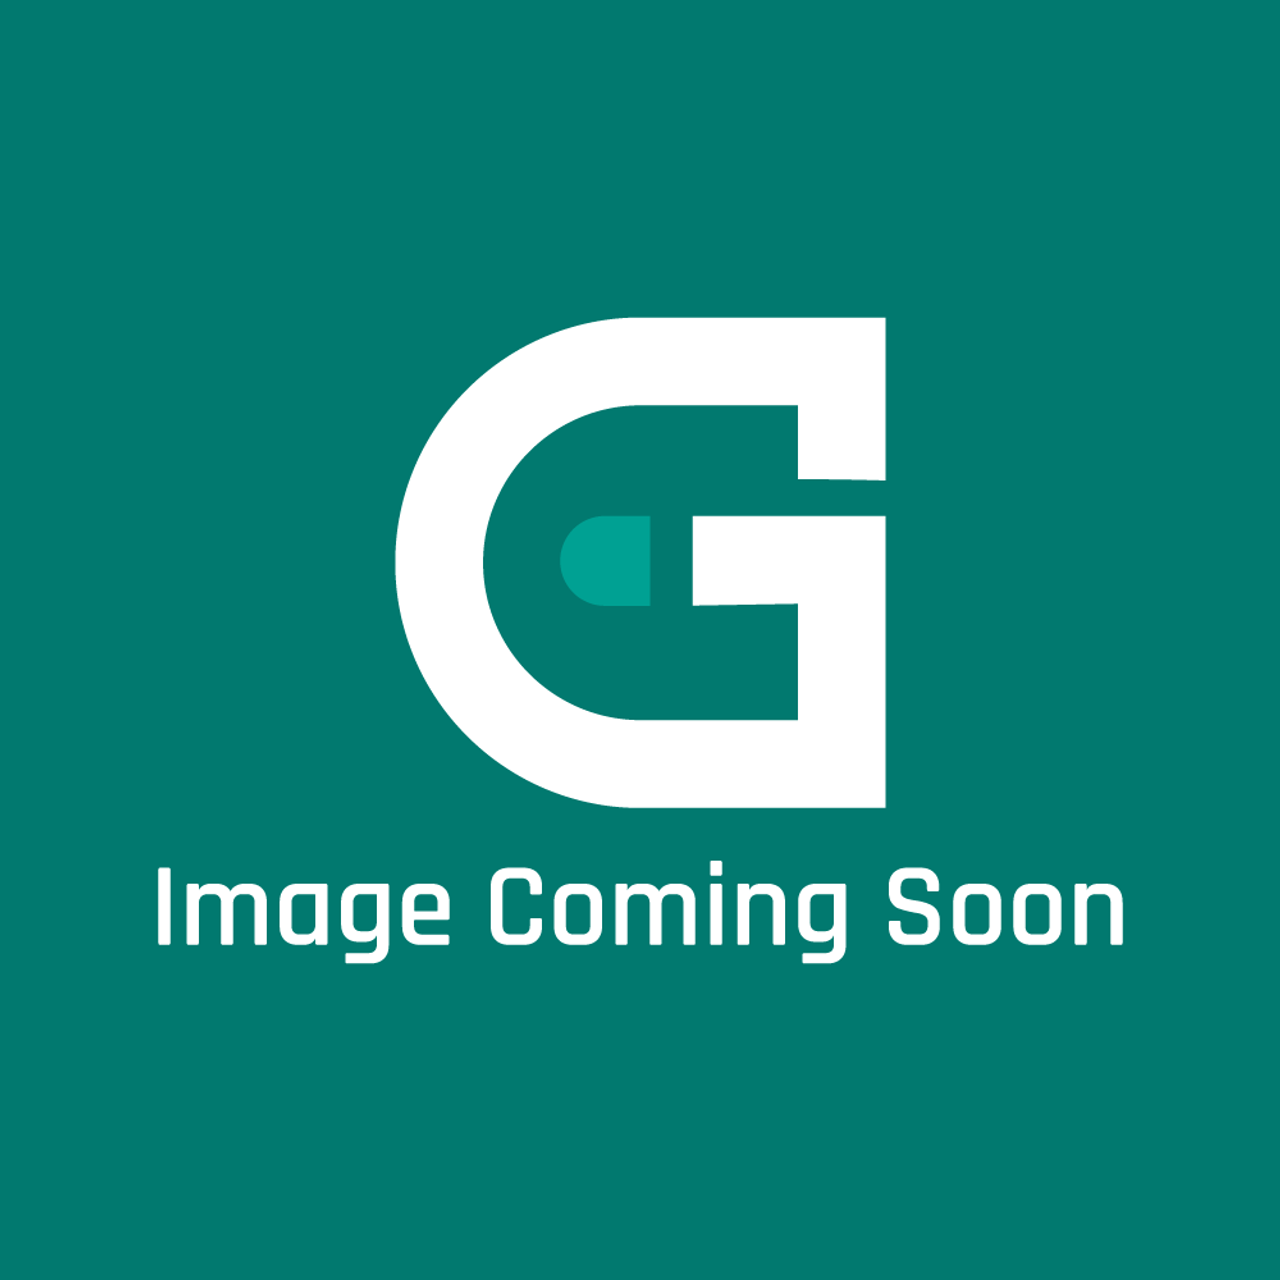 AGA Marvel AE4M260156 - Element-Warm Oven 20.35392.010 - Image Coming Soon!